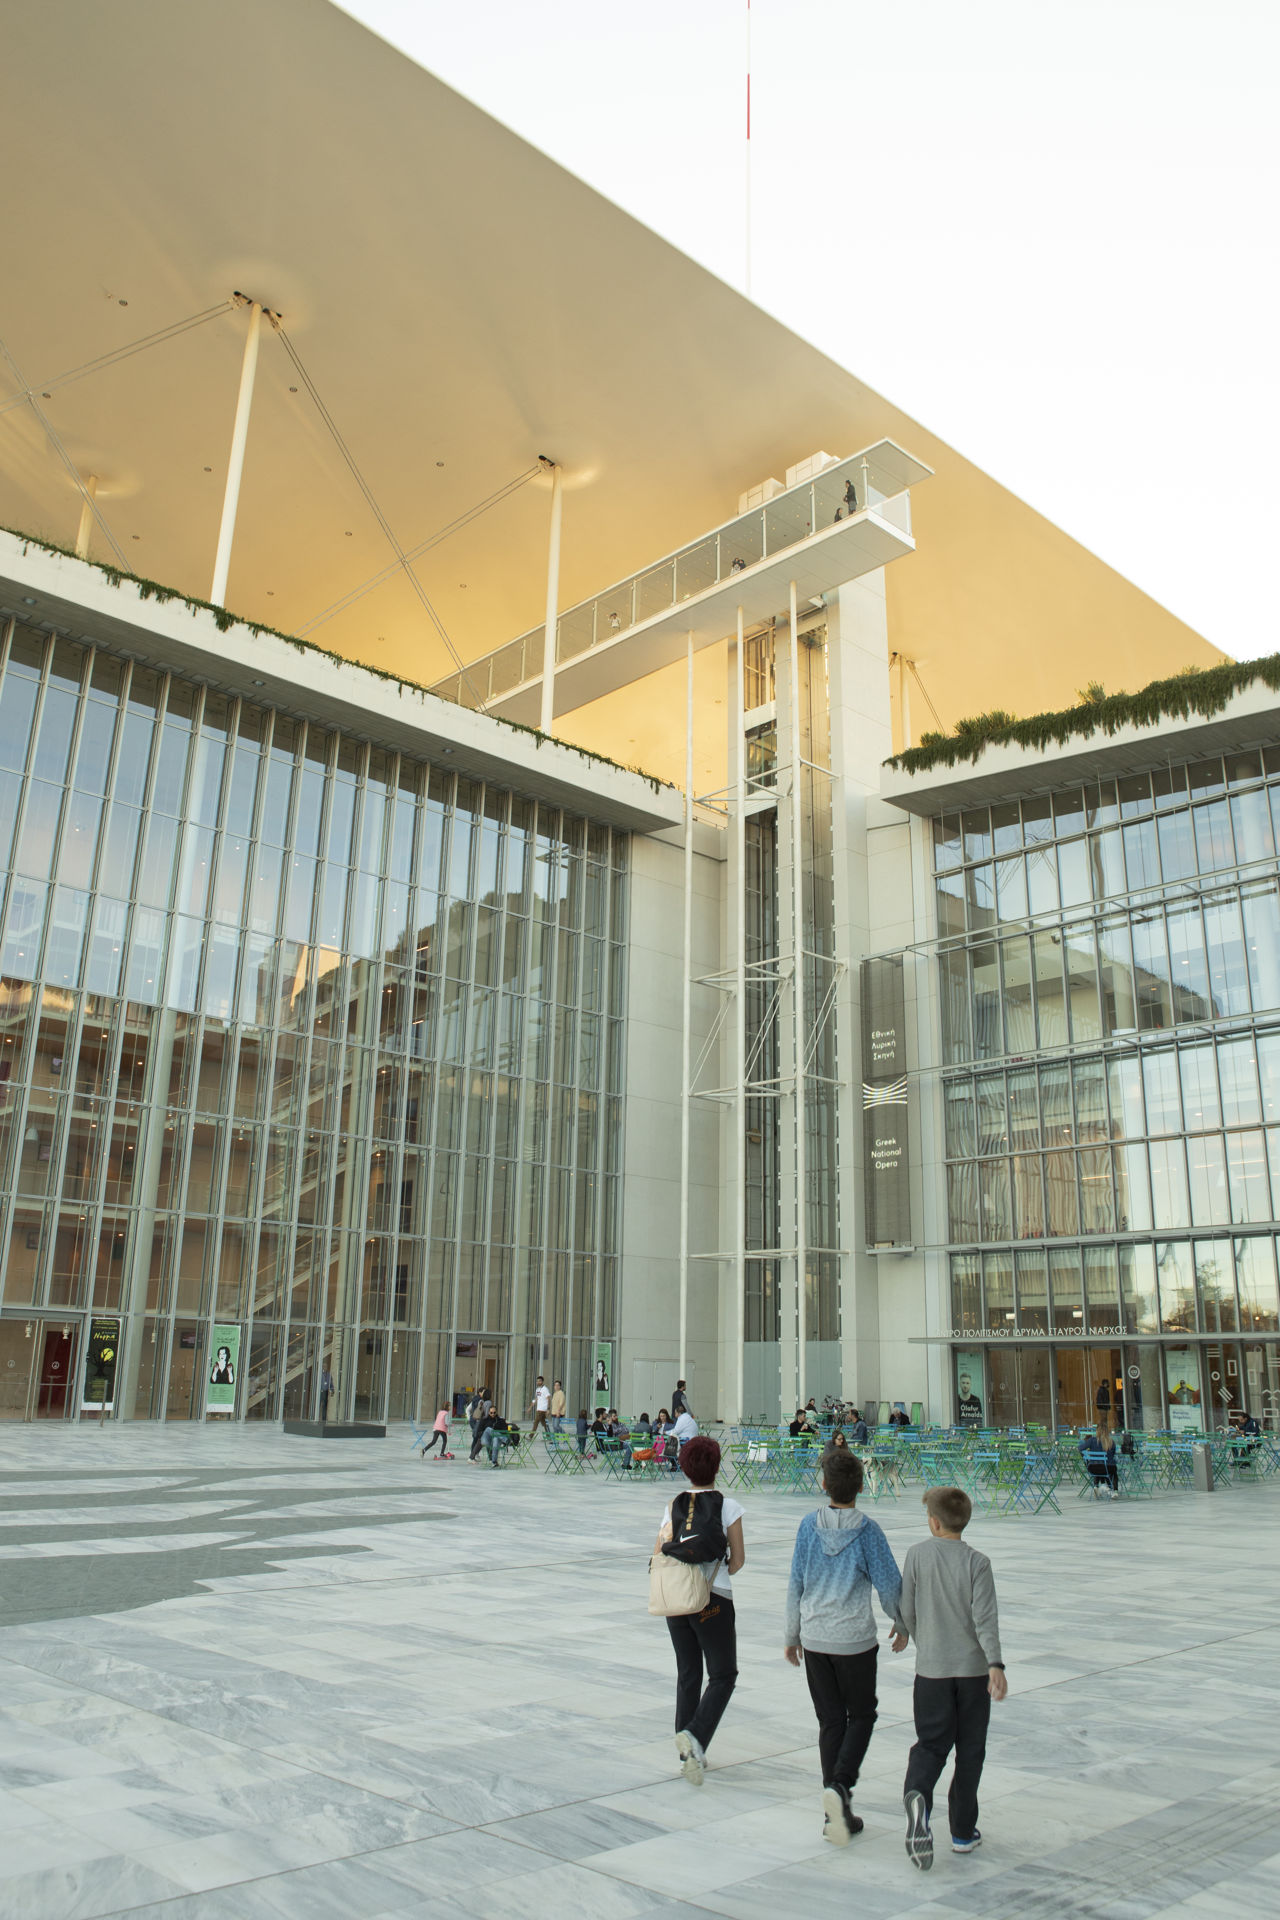 The Stavros Niarchos Foundation Library